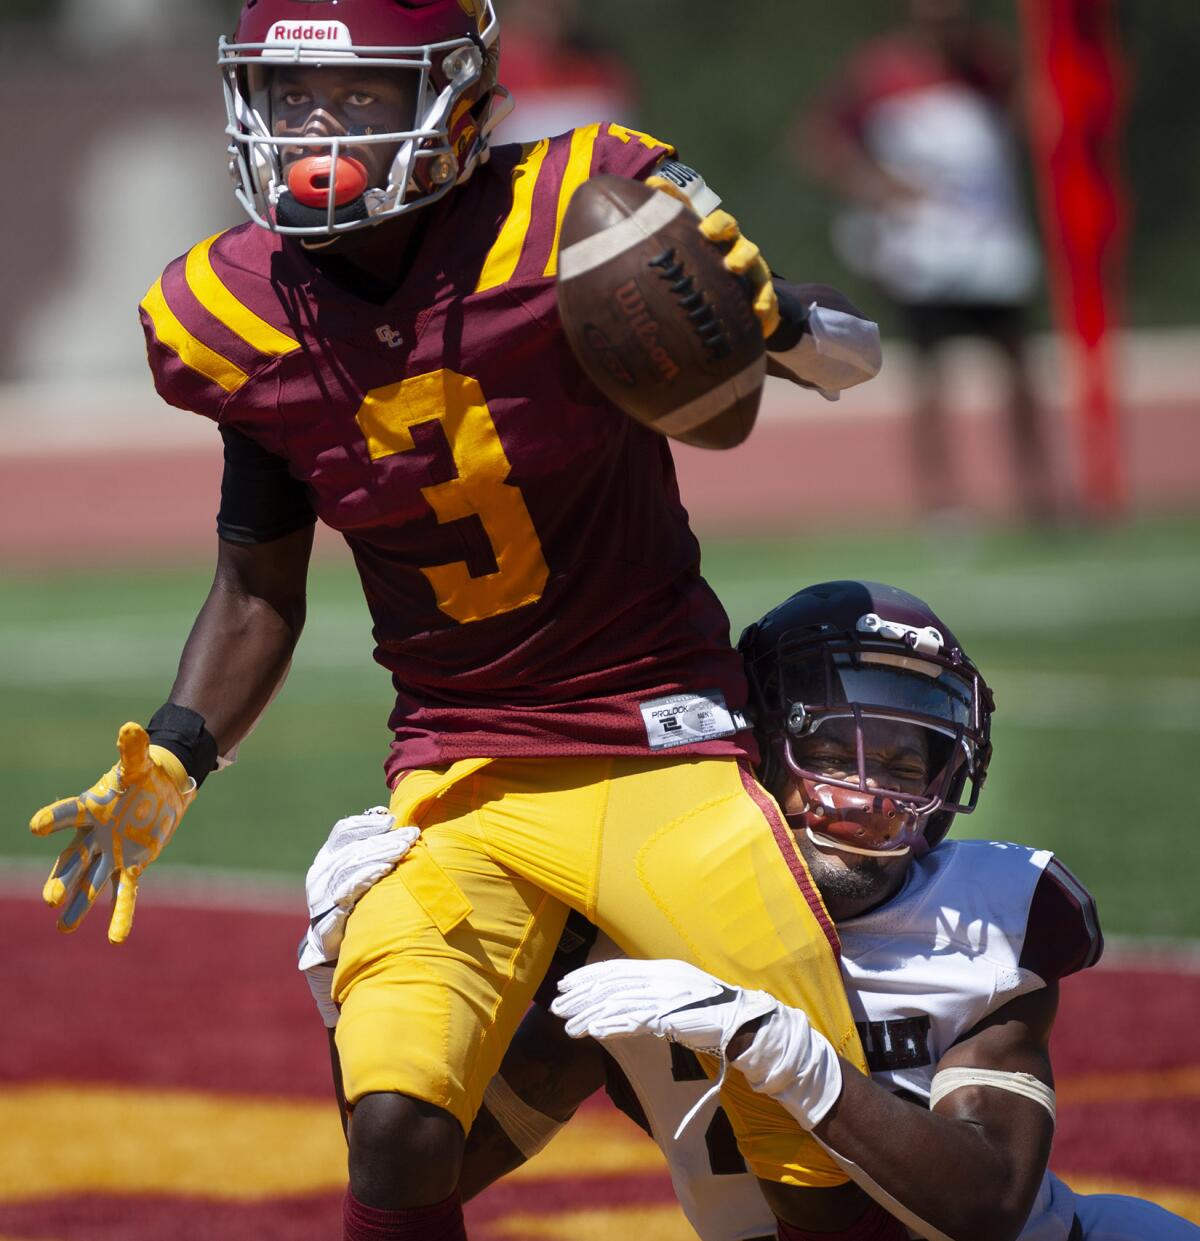 Glendale Community College’s Jalen Lawrence runs in the touchdown while being held by Antelope Valley College’s Jaylen Sargent during Saturday's game at GCC. (Photo by Miguel Vasconcellos)